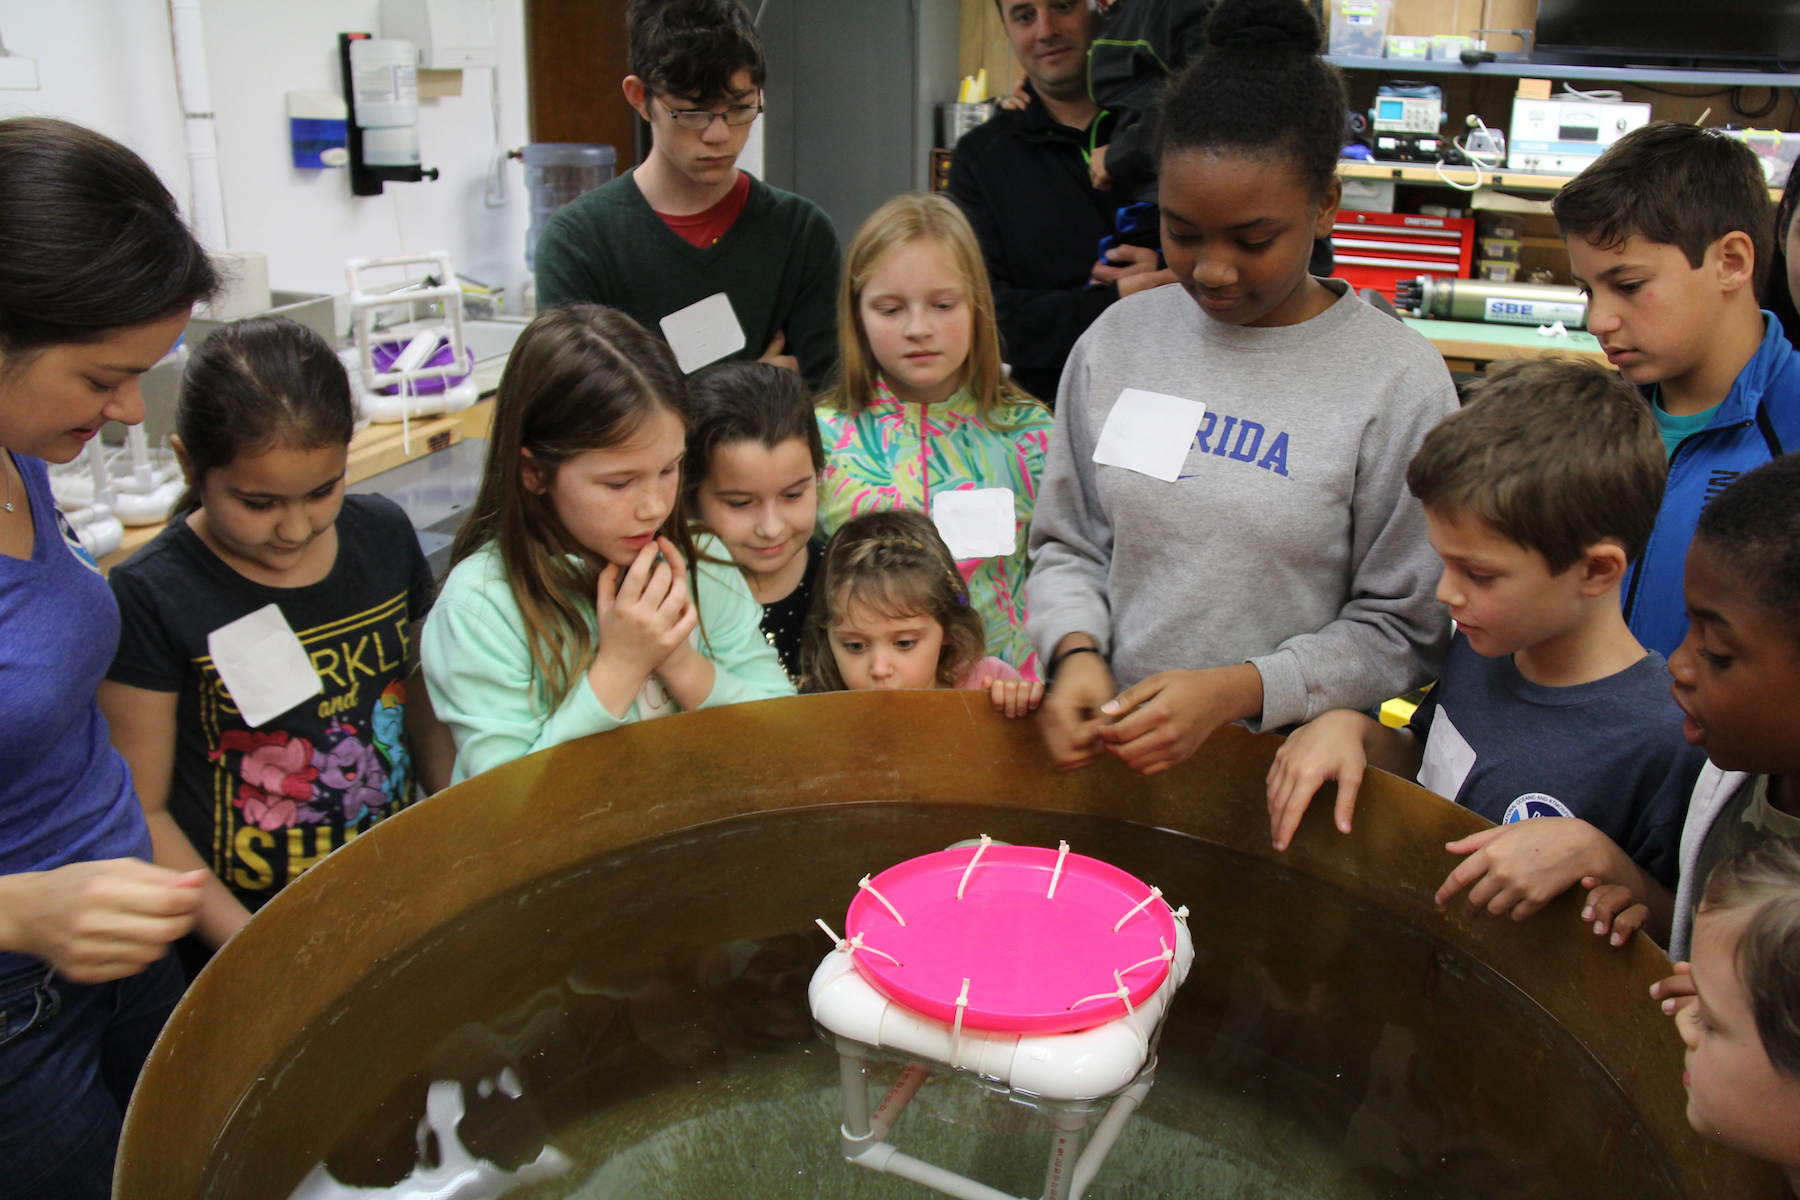 Students watch as their ocean drifters are tested for buoyancy and ability to hold a payload. Image credit: NOAA